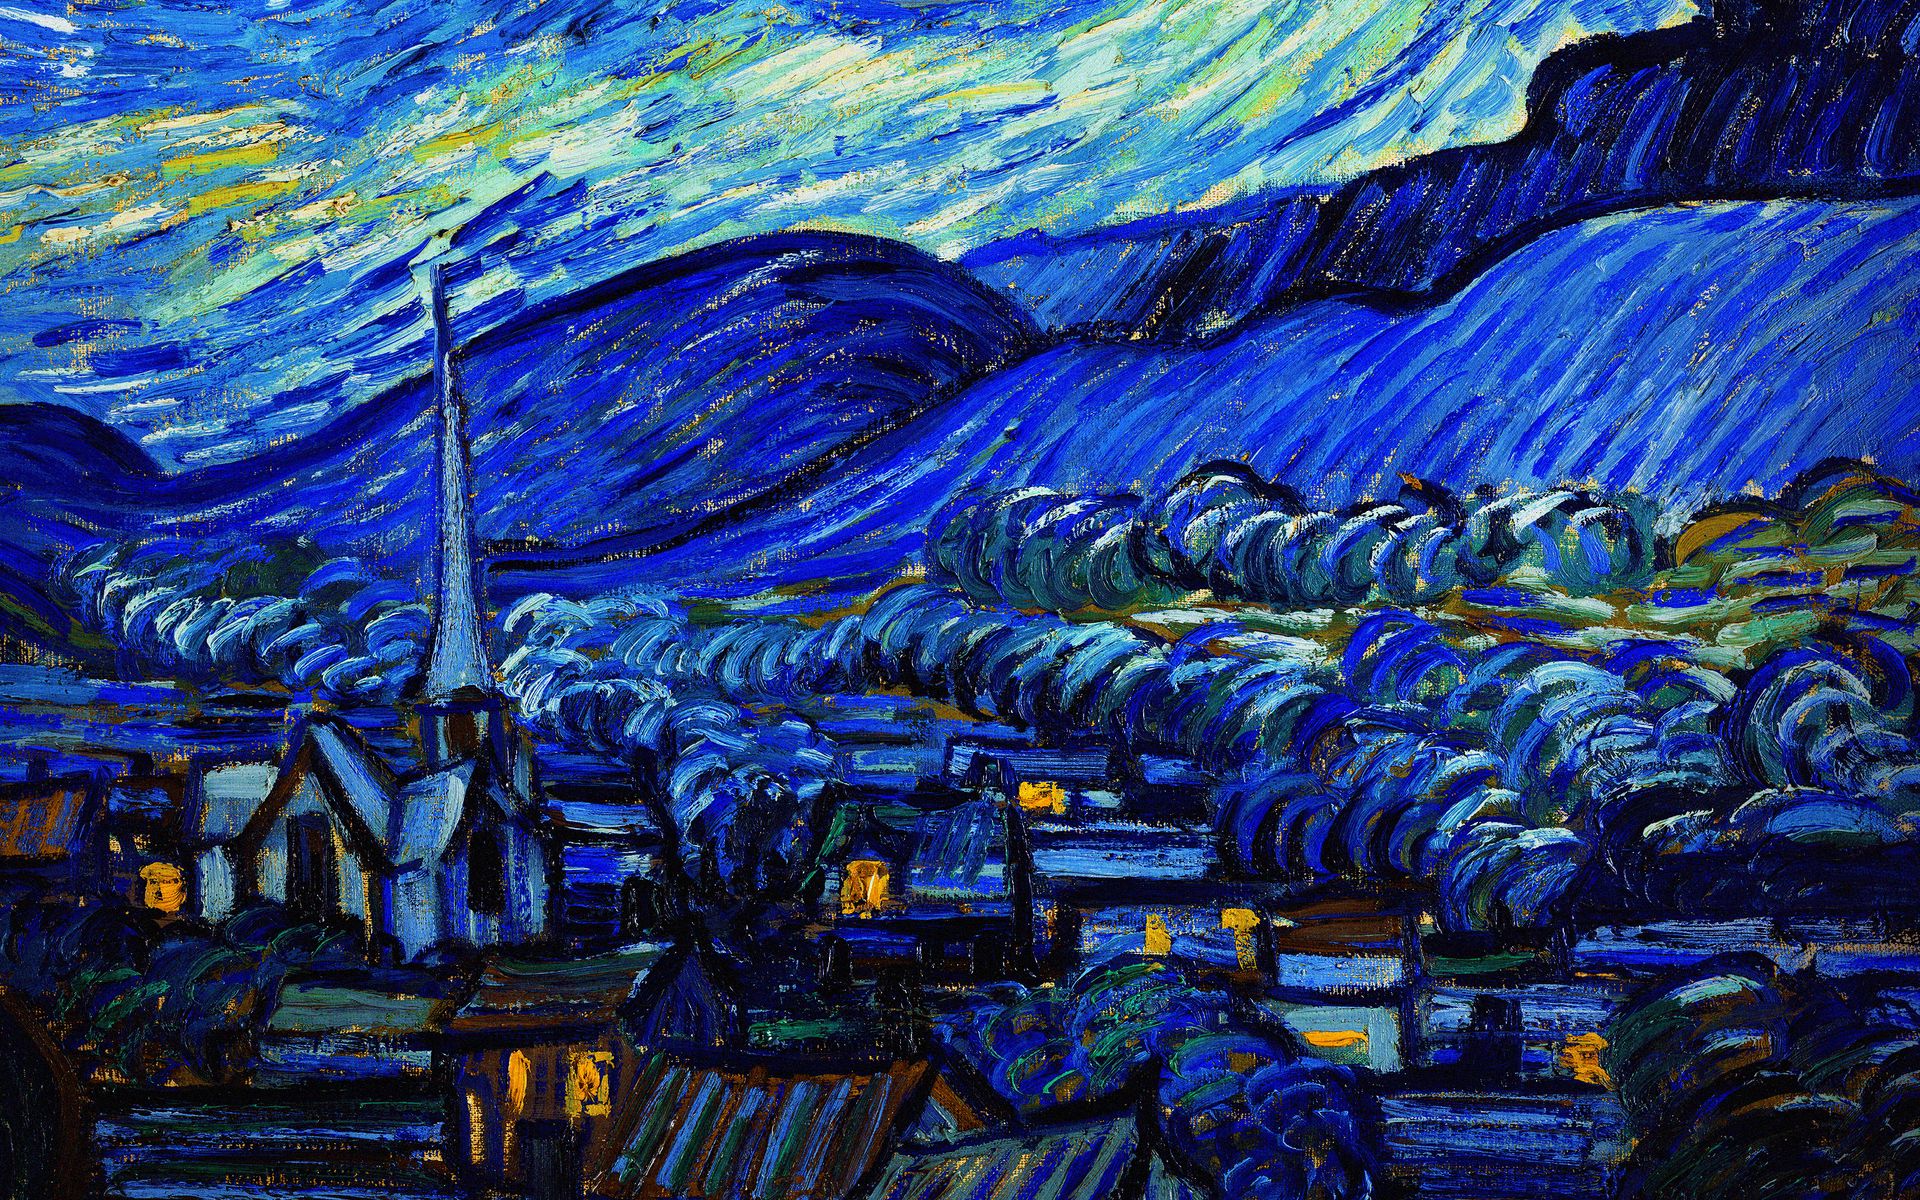 Download wallpaper 1920x1200 van gogh, starry night, night, paint, painting widescreen 16:10 HD background